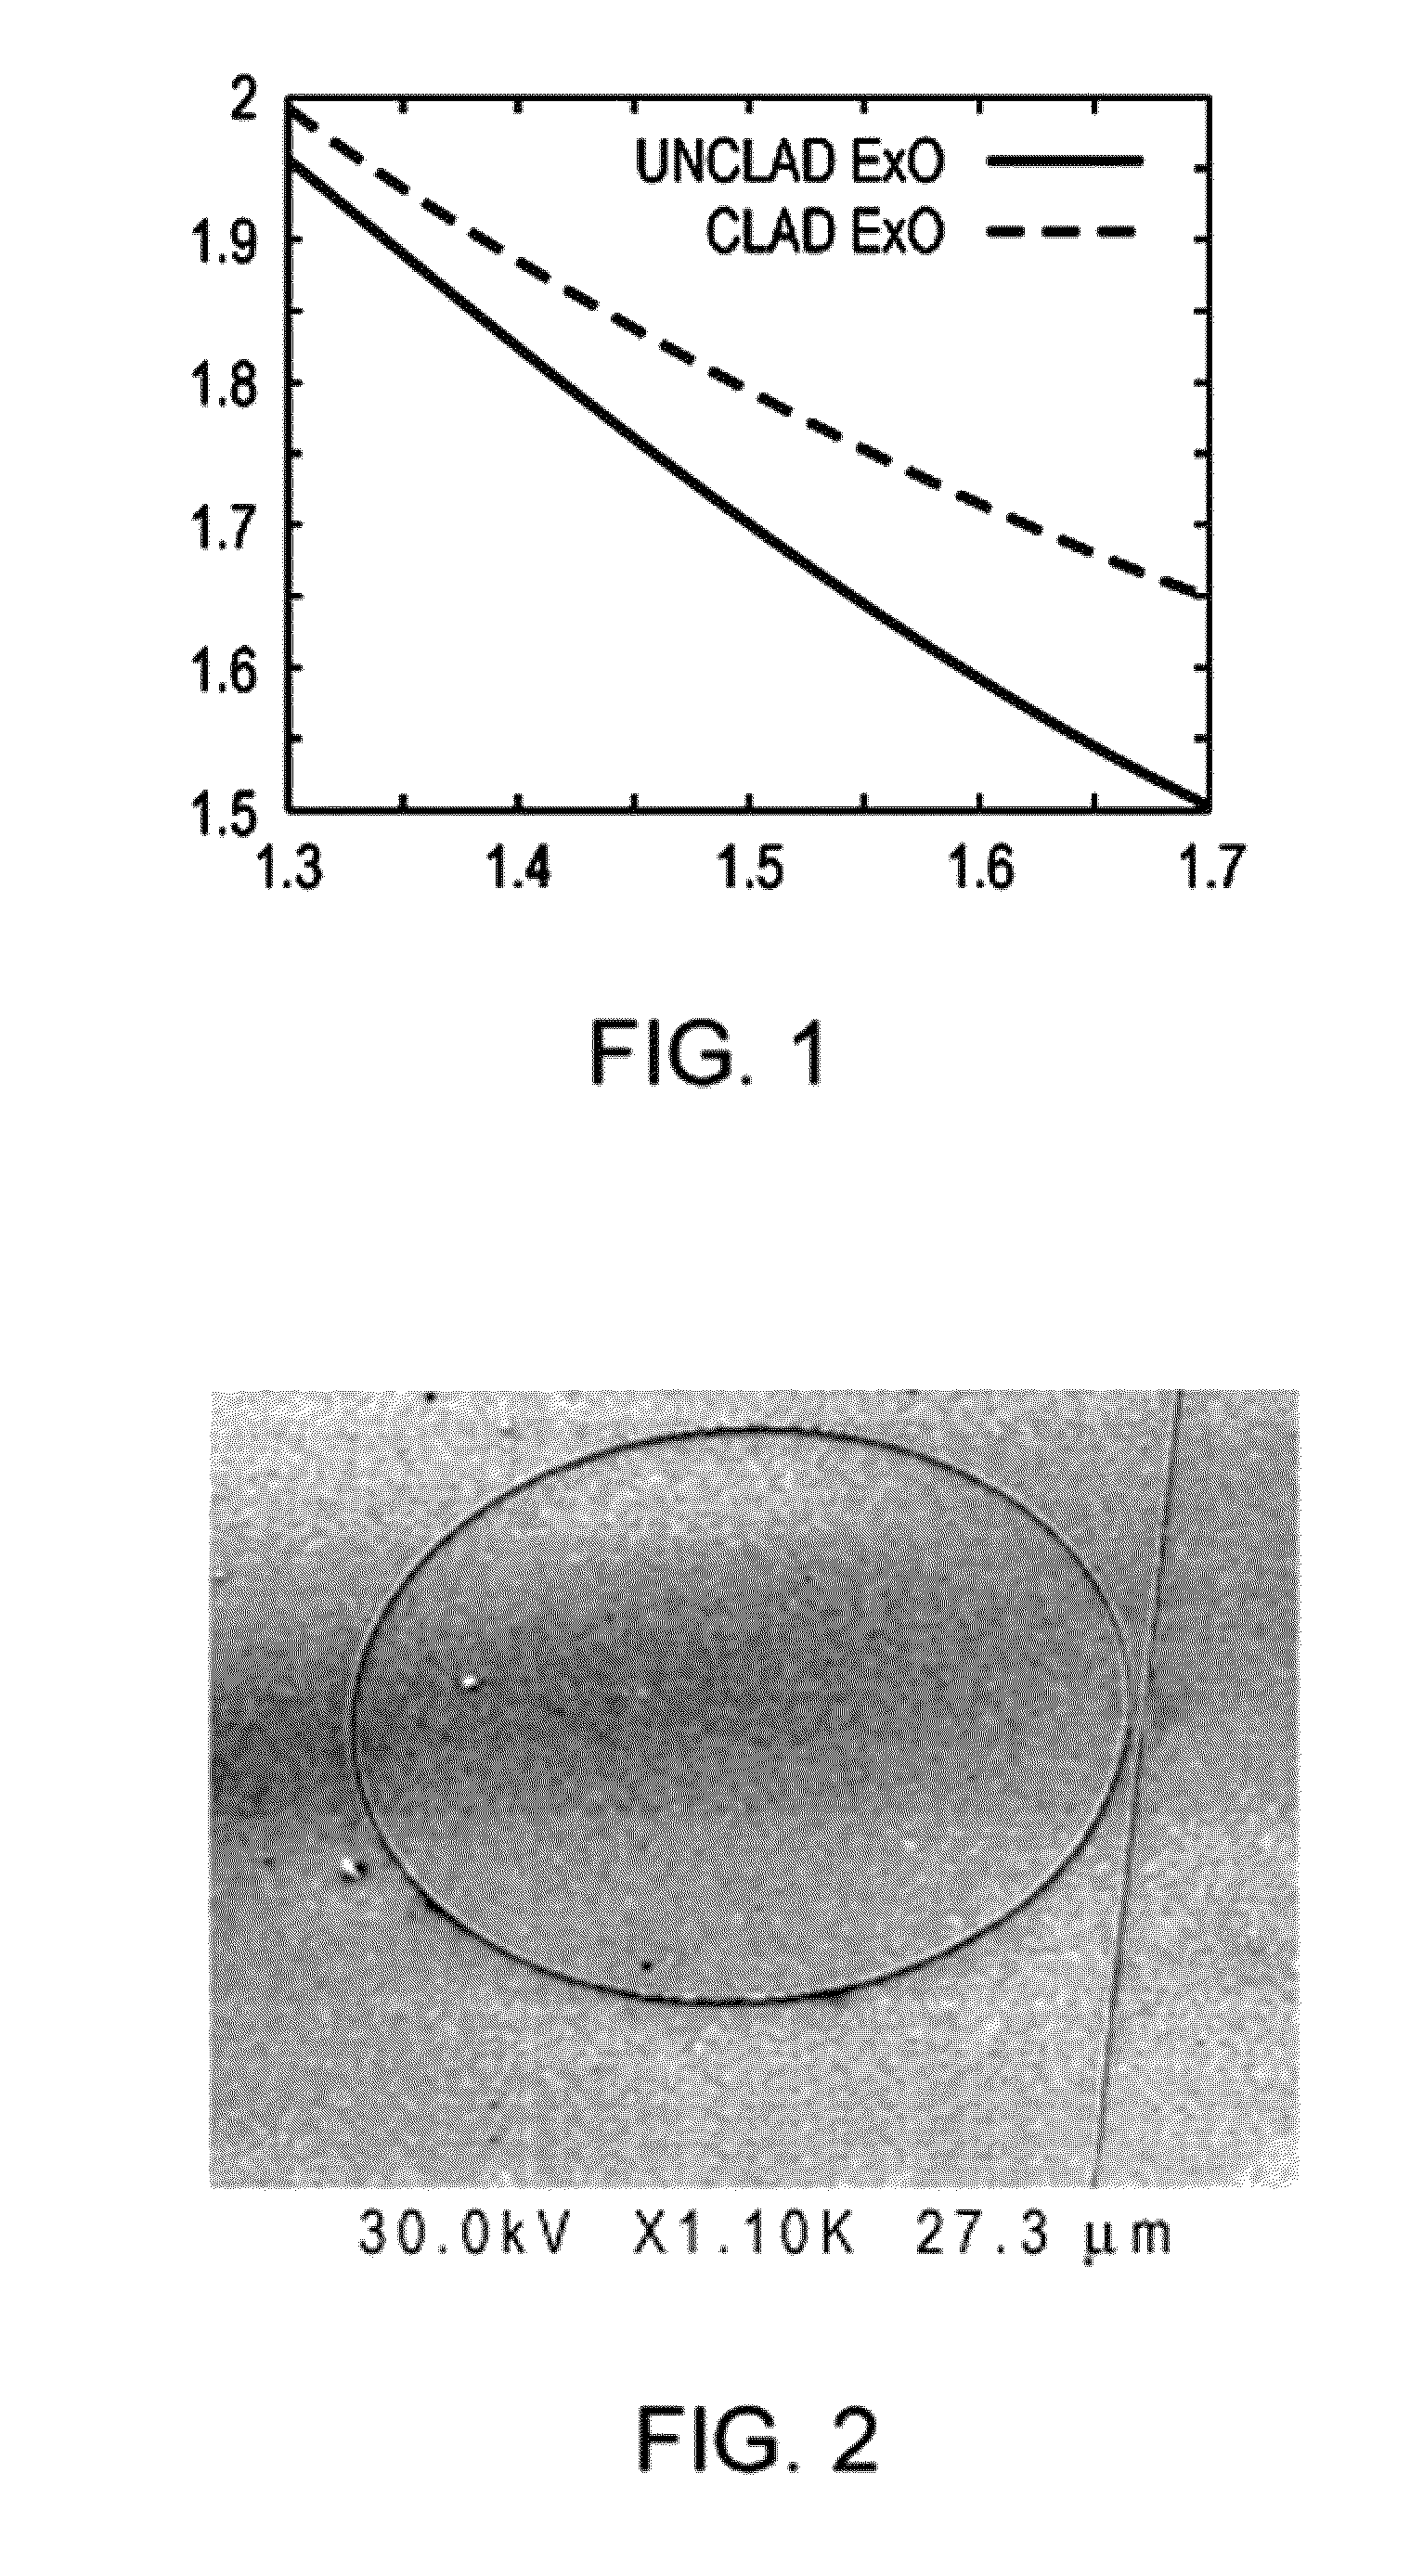 Method of performing hyperspectral imaging with photonic integrated circuits